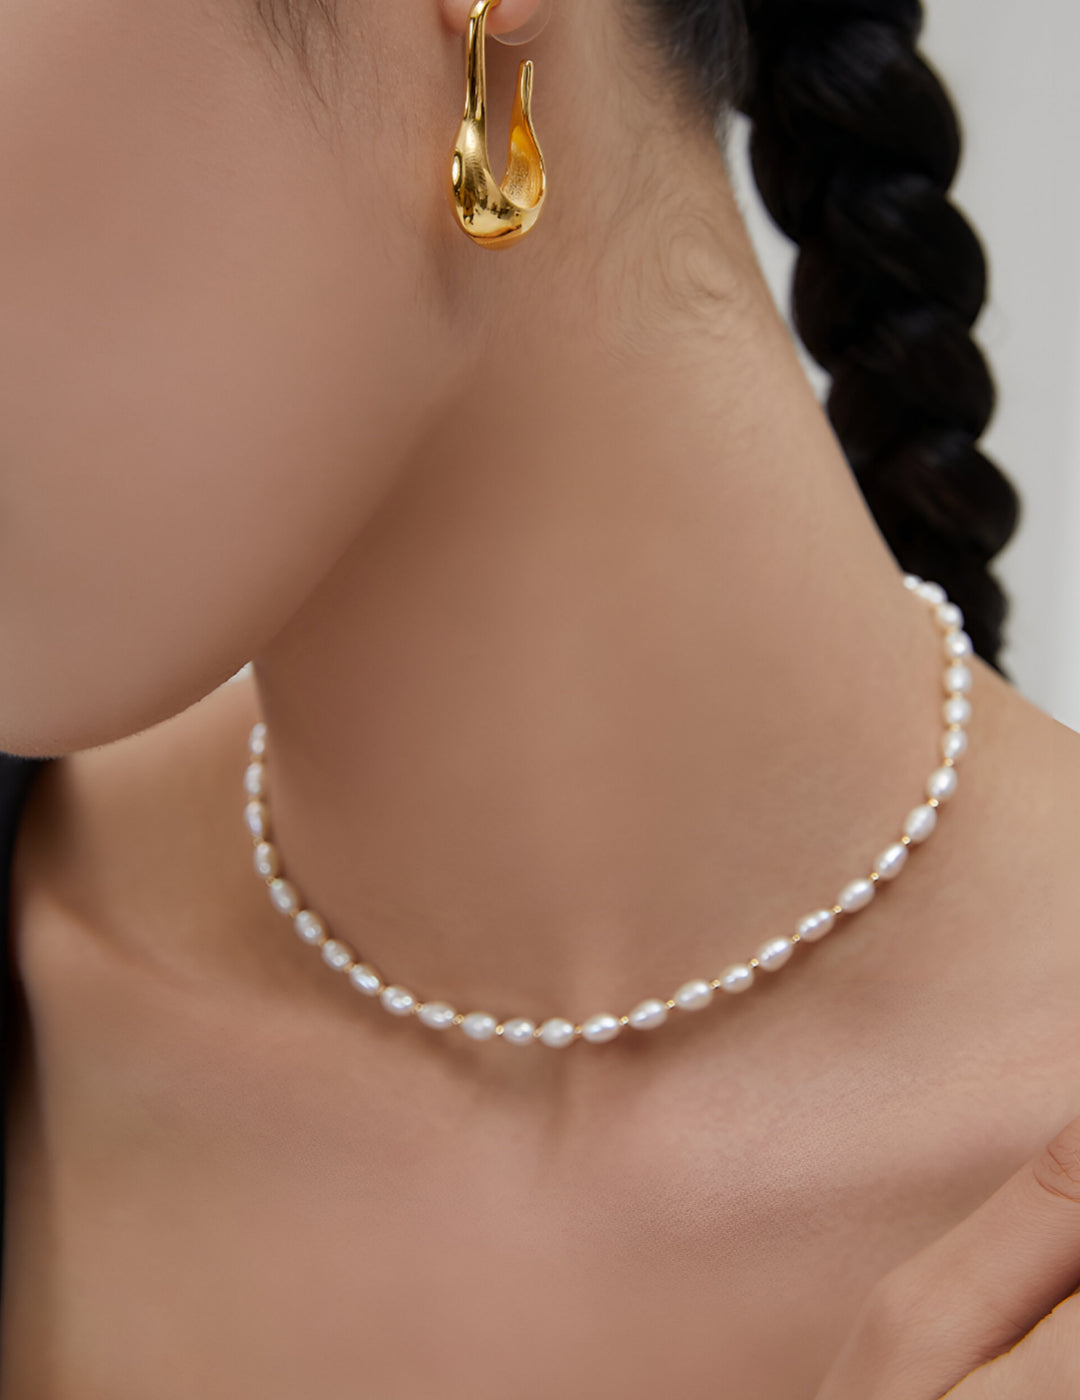 Simple Button Pearl Necklace  - S925 Sterling Silver with 18K Gold Vermeil  - Pearl Luminance - Elegant Essentials - Discover the allure of classic pearls - perfect for any occasion